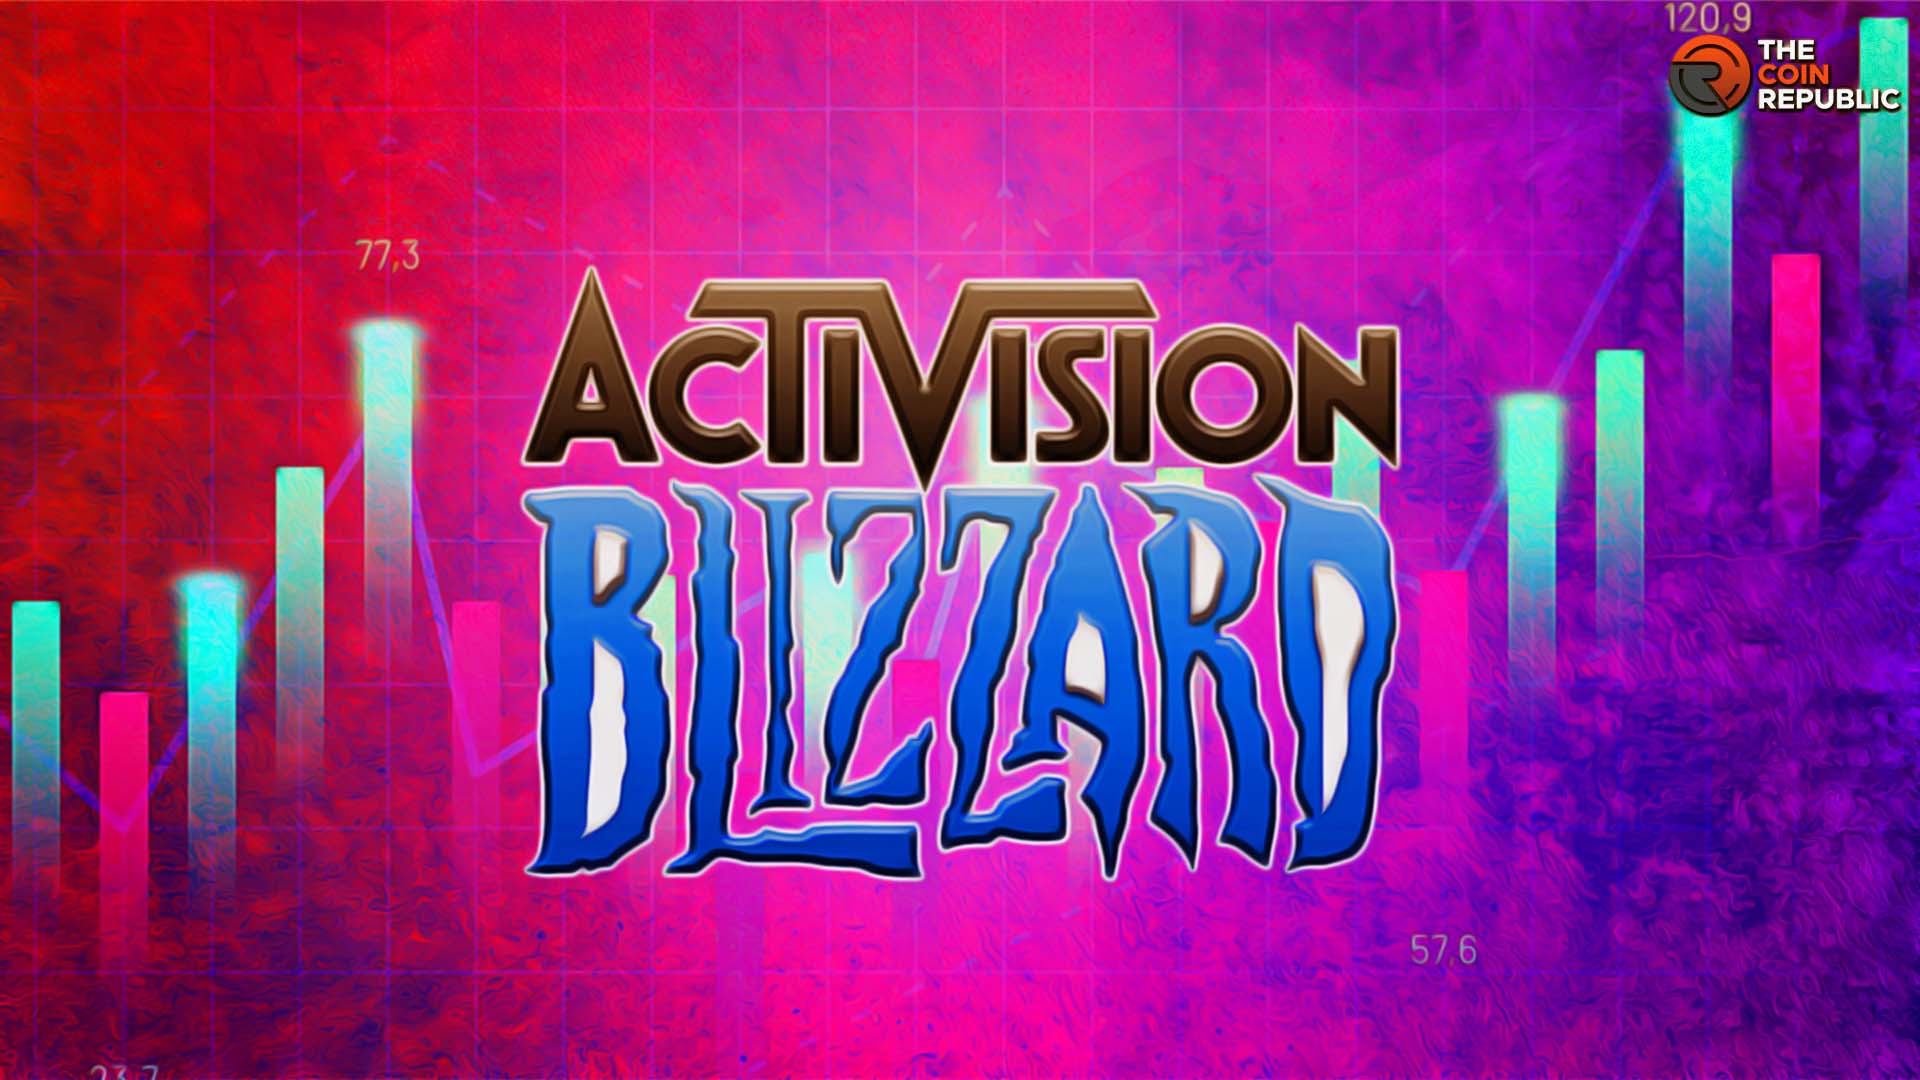 Activision Blizzard $69B Acquisition Deal is On; ATVI Stock Rose 10%